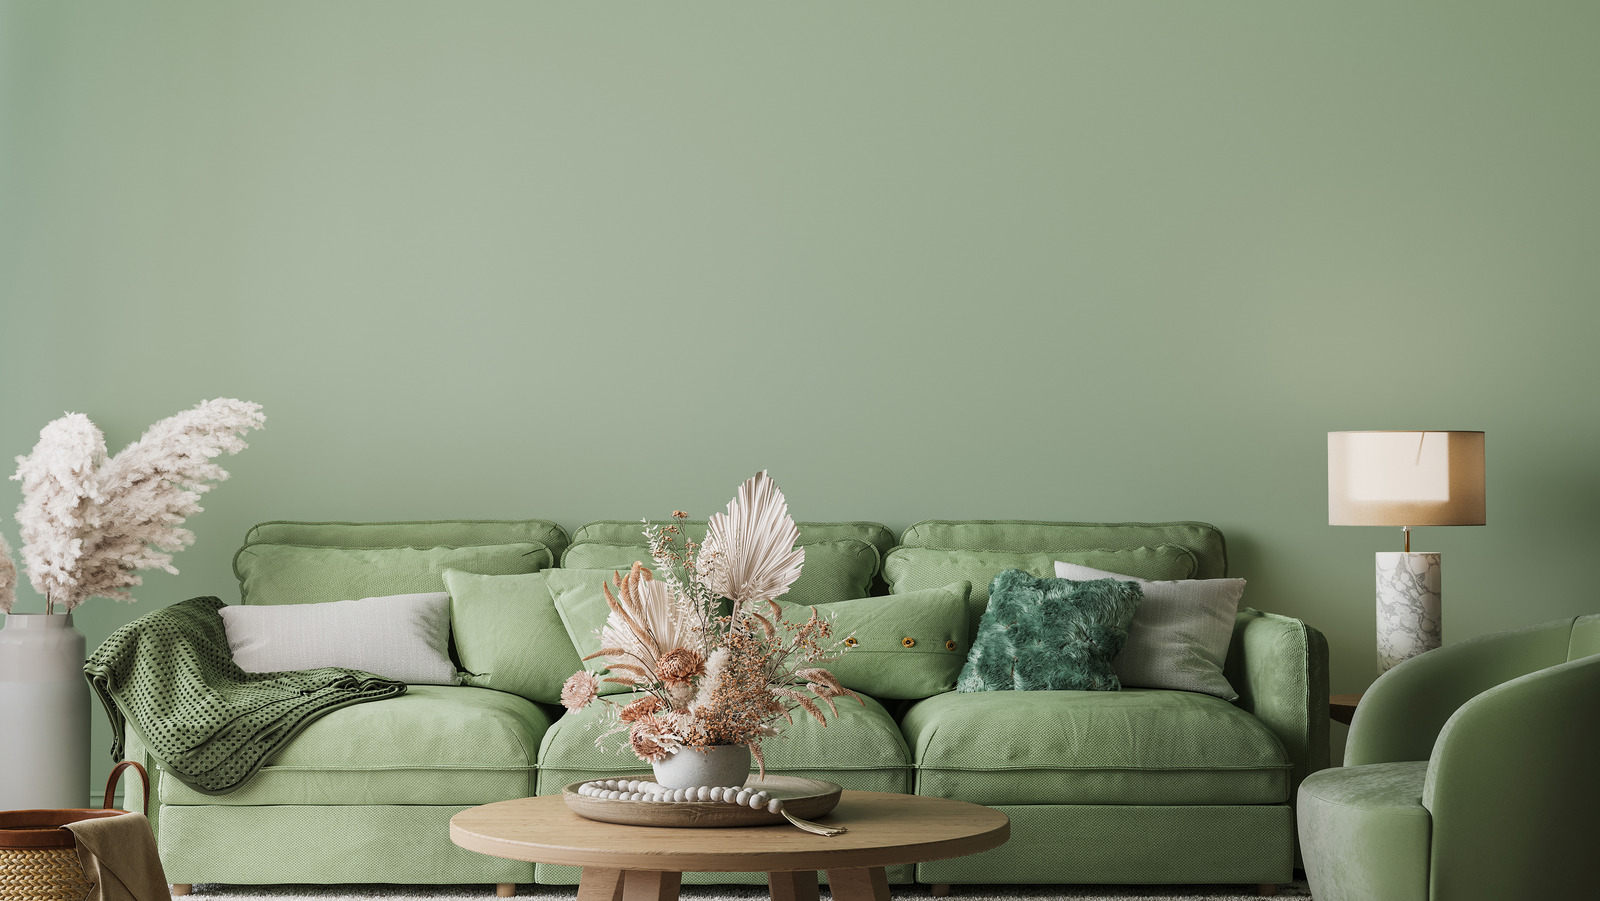 https://www.housedigest.com/img/gallery/10-sage-green-paint-colors-to-make-your-home-feel-calming/l-intro-1643227406.jpg